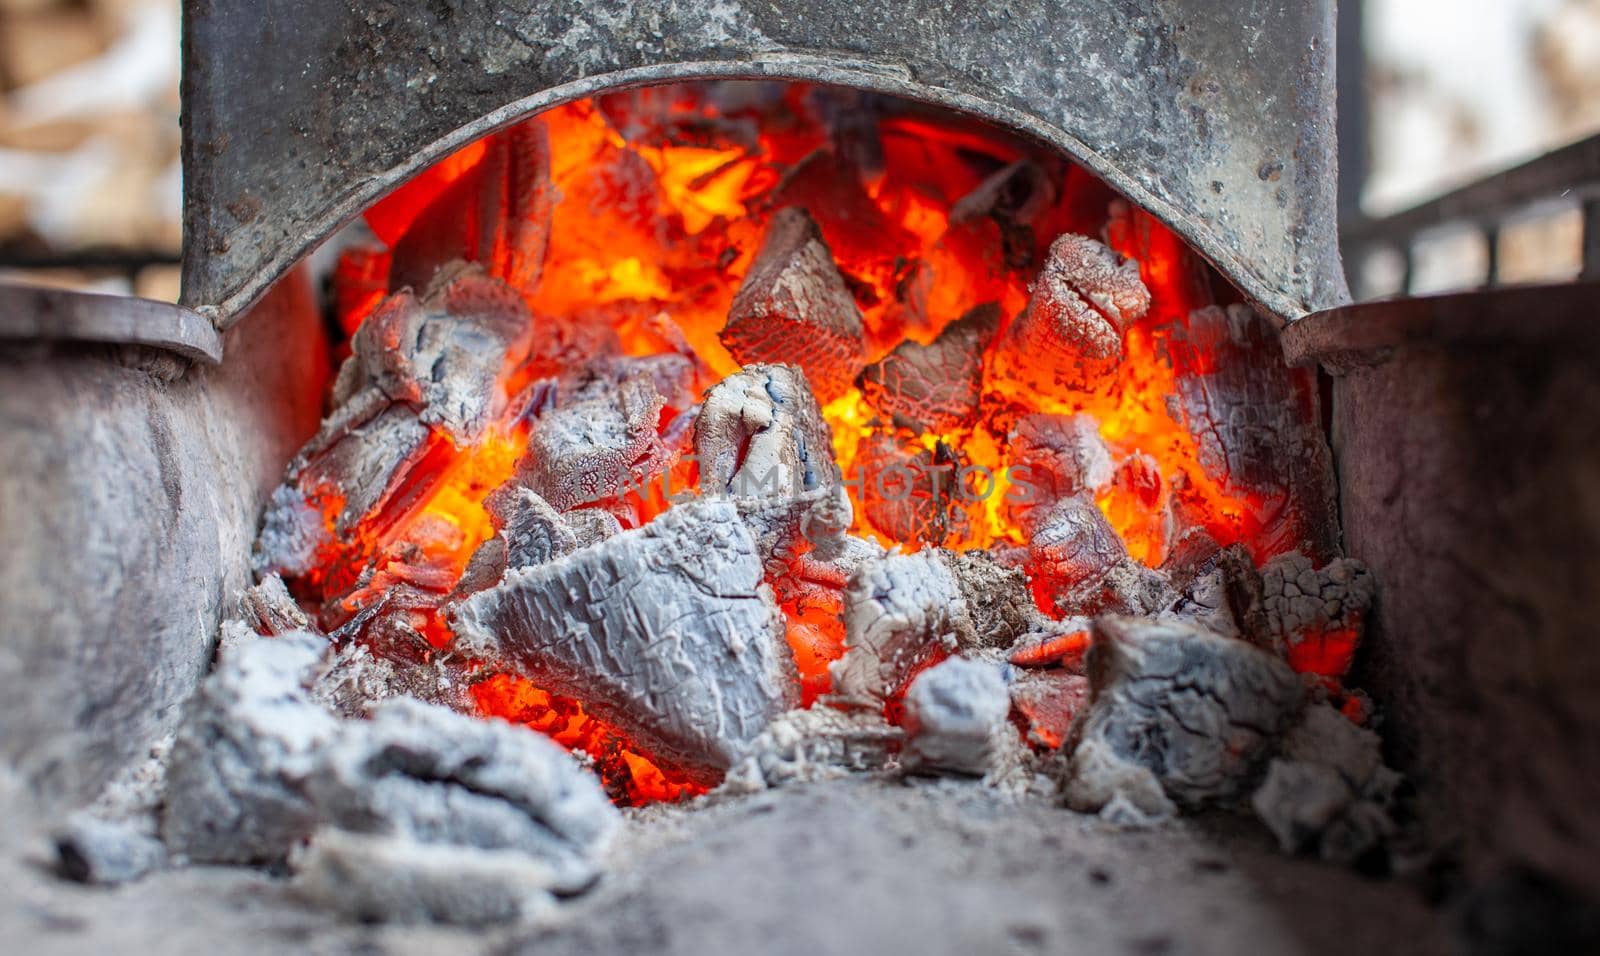 Burning coals in a metal grill for frying meat and vegetables. Cooking on a campfire.